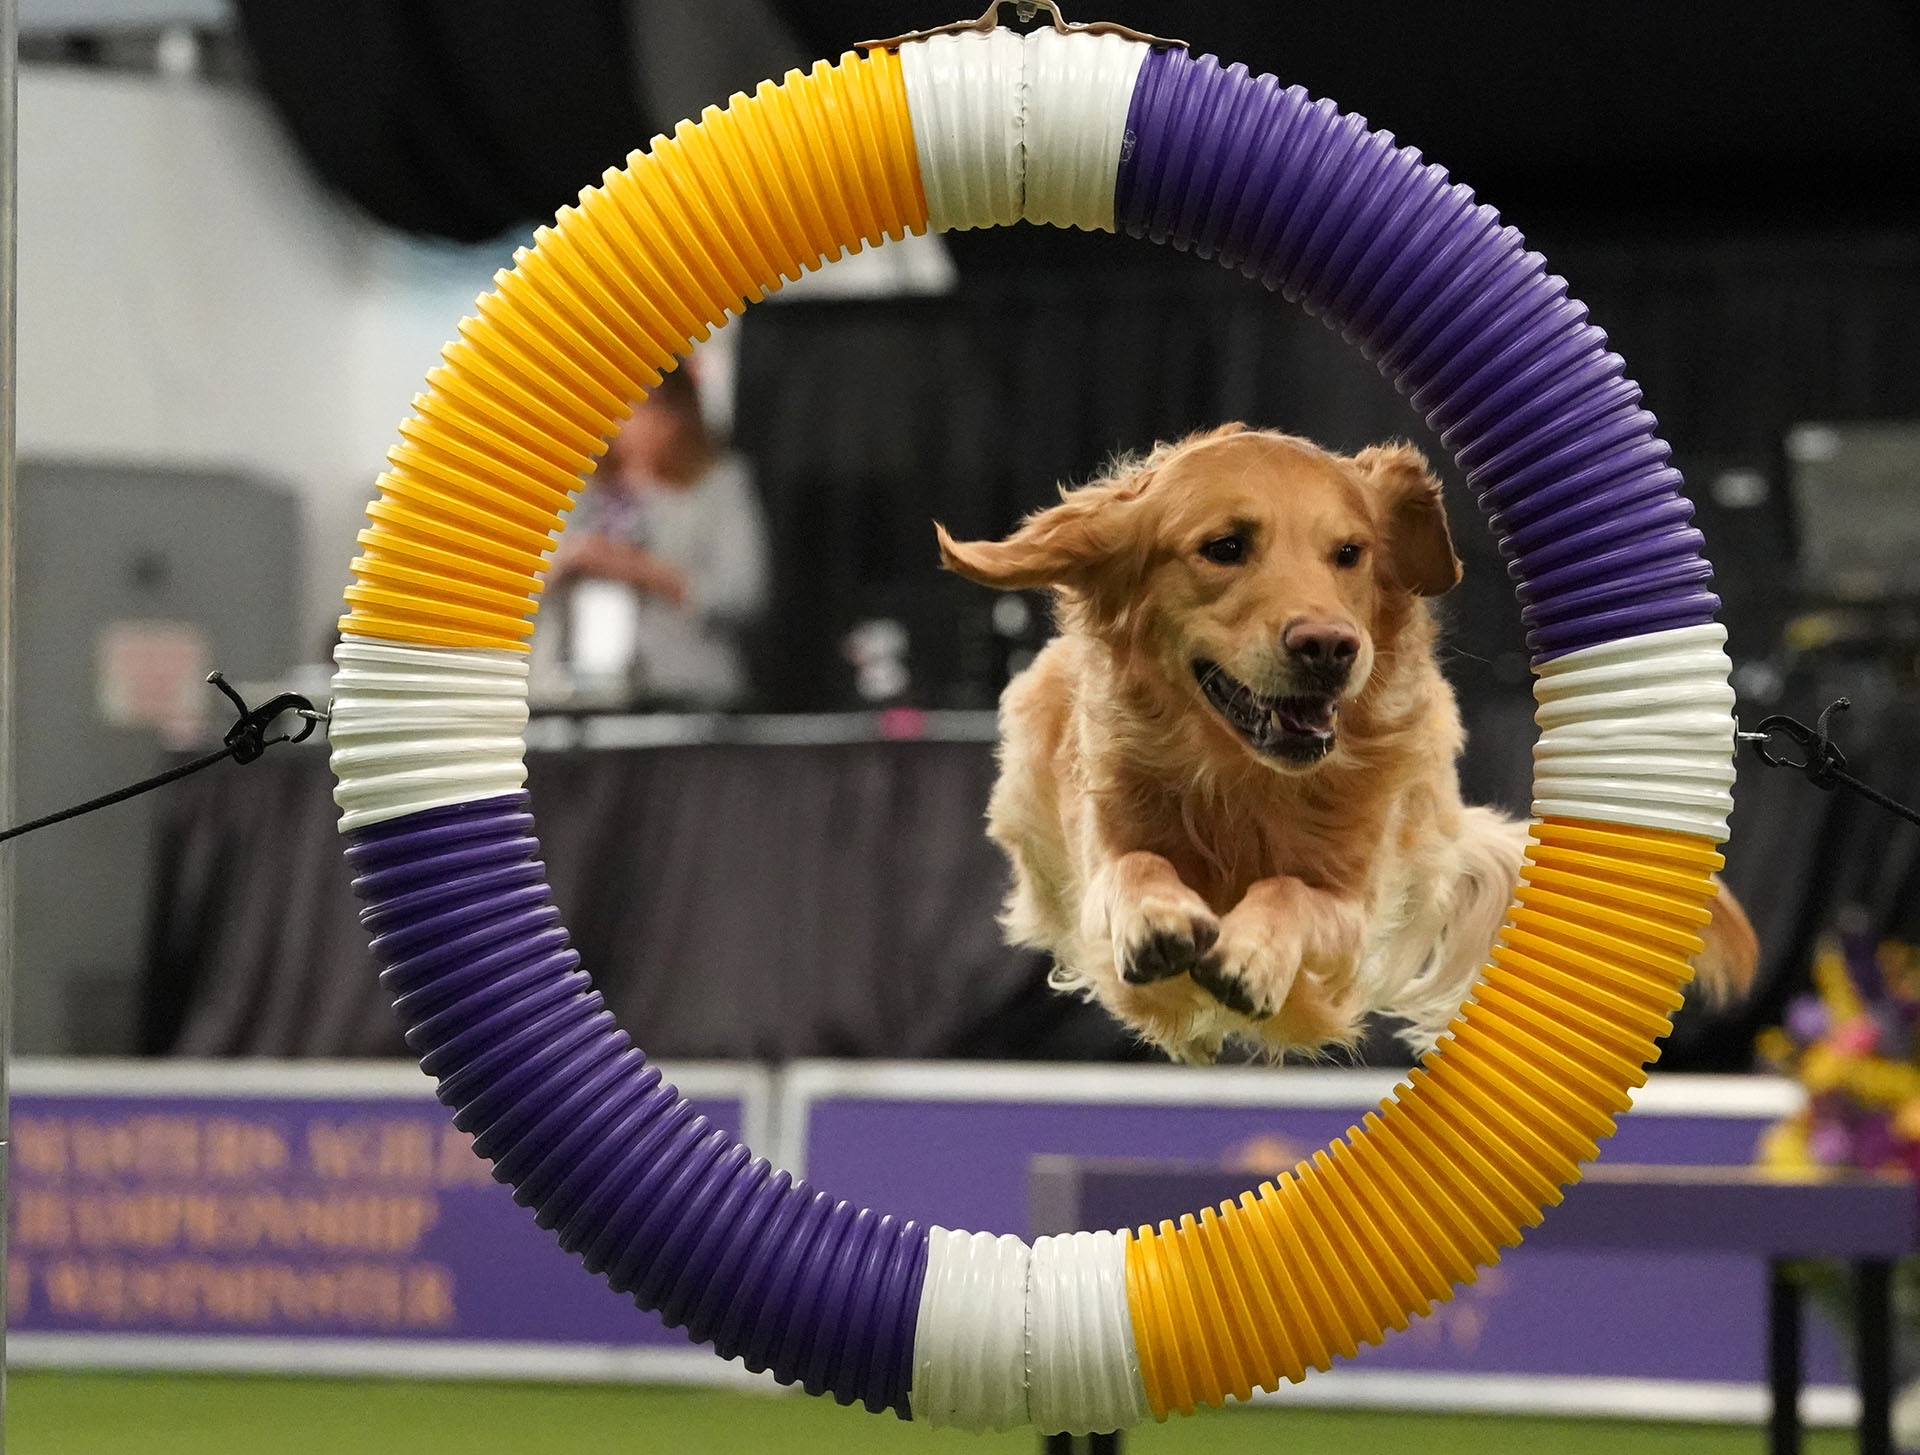 A dog competes in the 6th Annual Masters Agility Championship as the The American Kennel Club and Westminster Kennel Club present Meet & Compete on February 9, 2019, at Piers 92 and 94 in New York. (Photo by TIMOTHY A. CLARY / AFP)